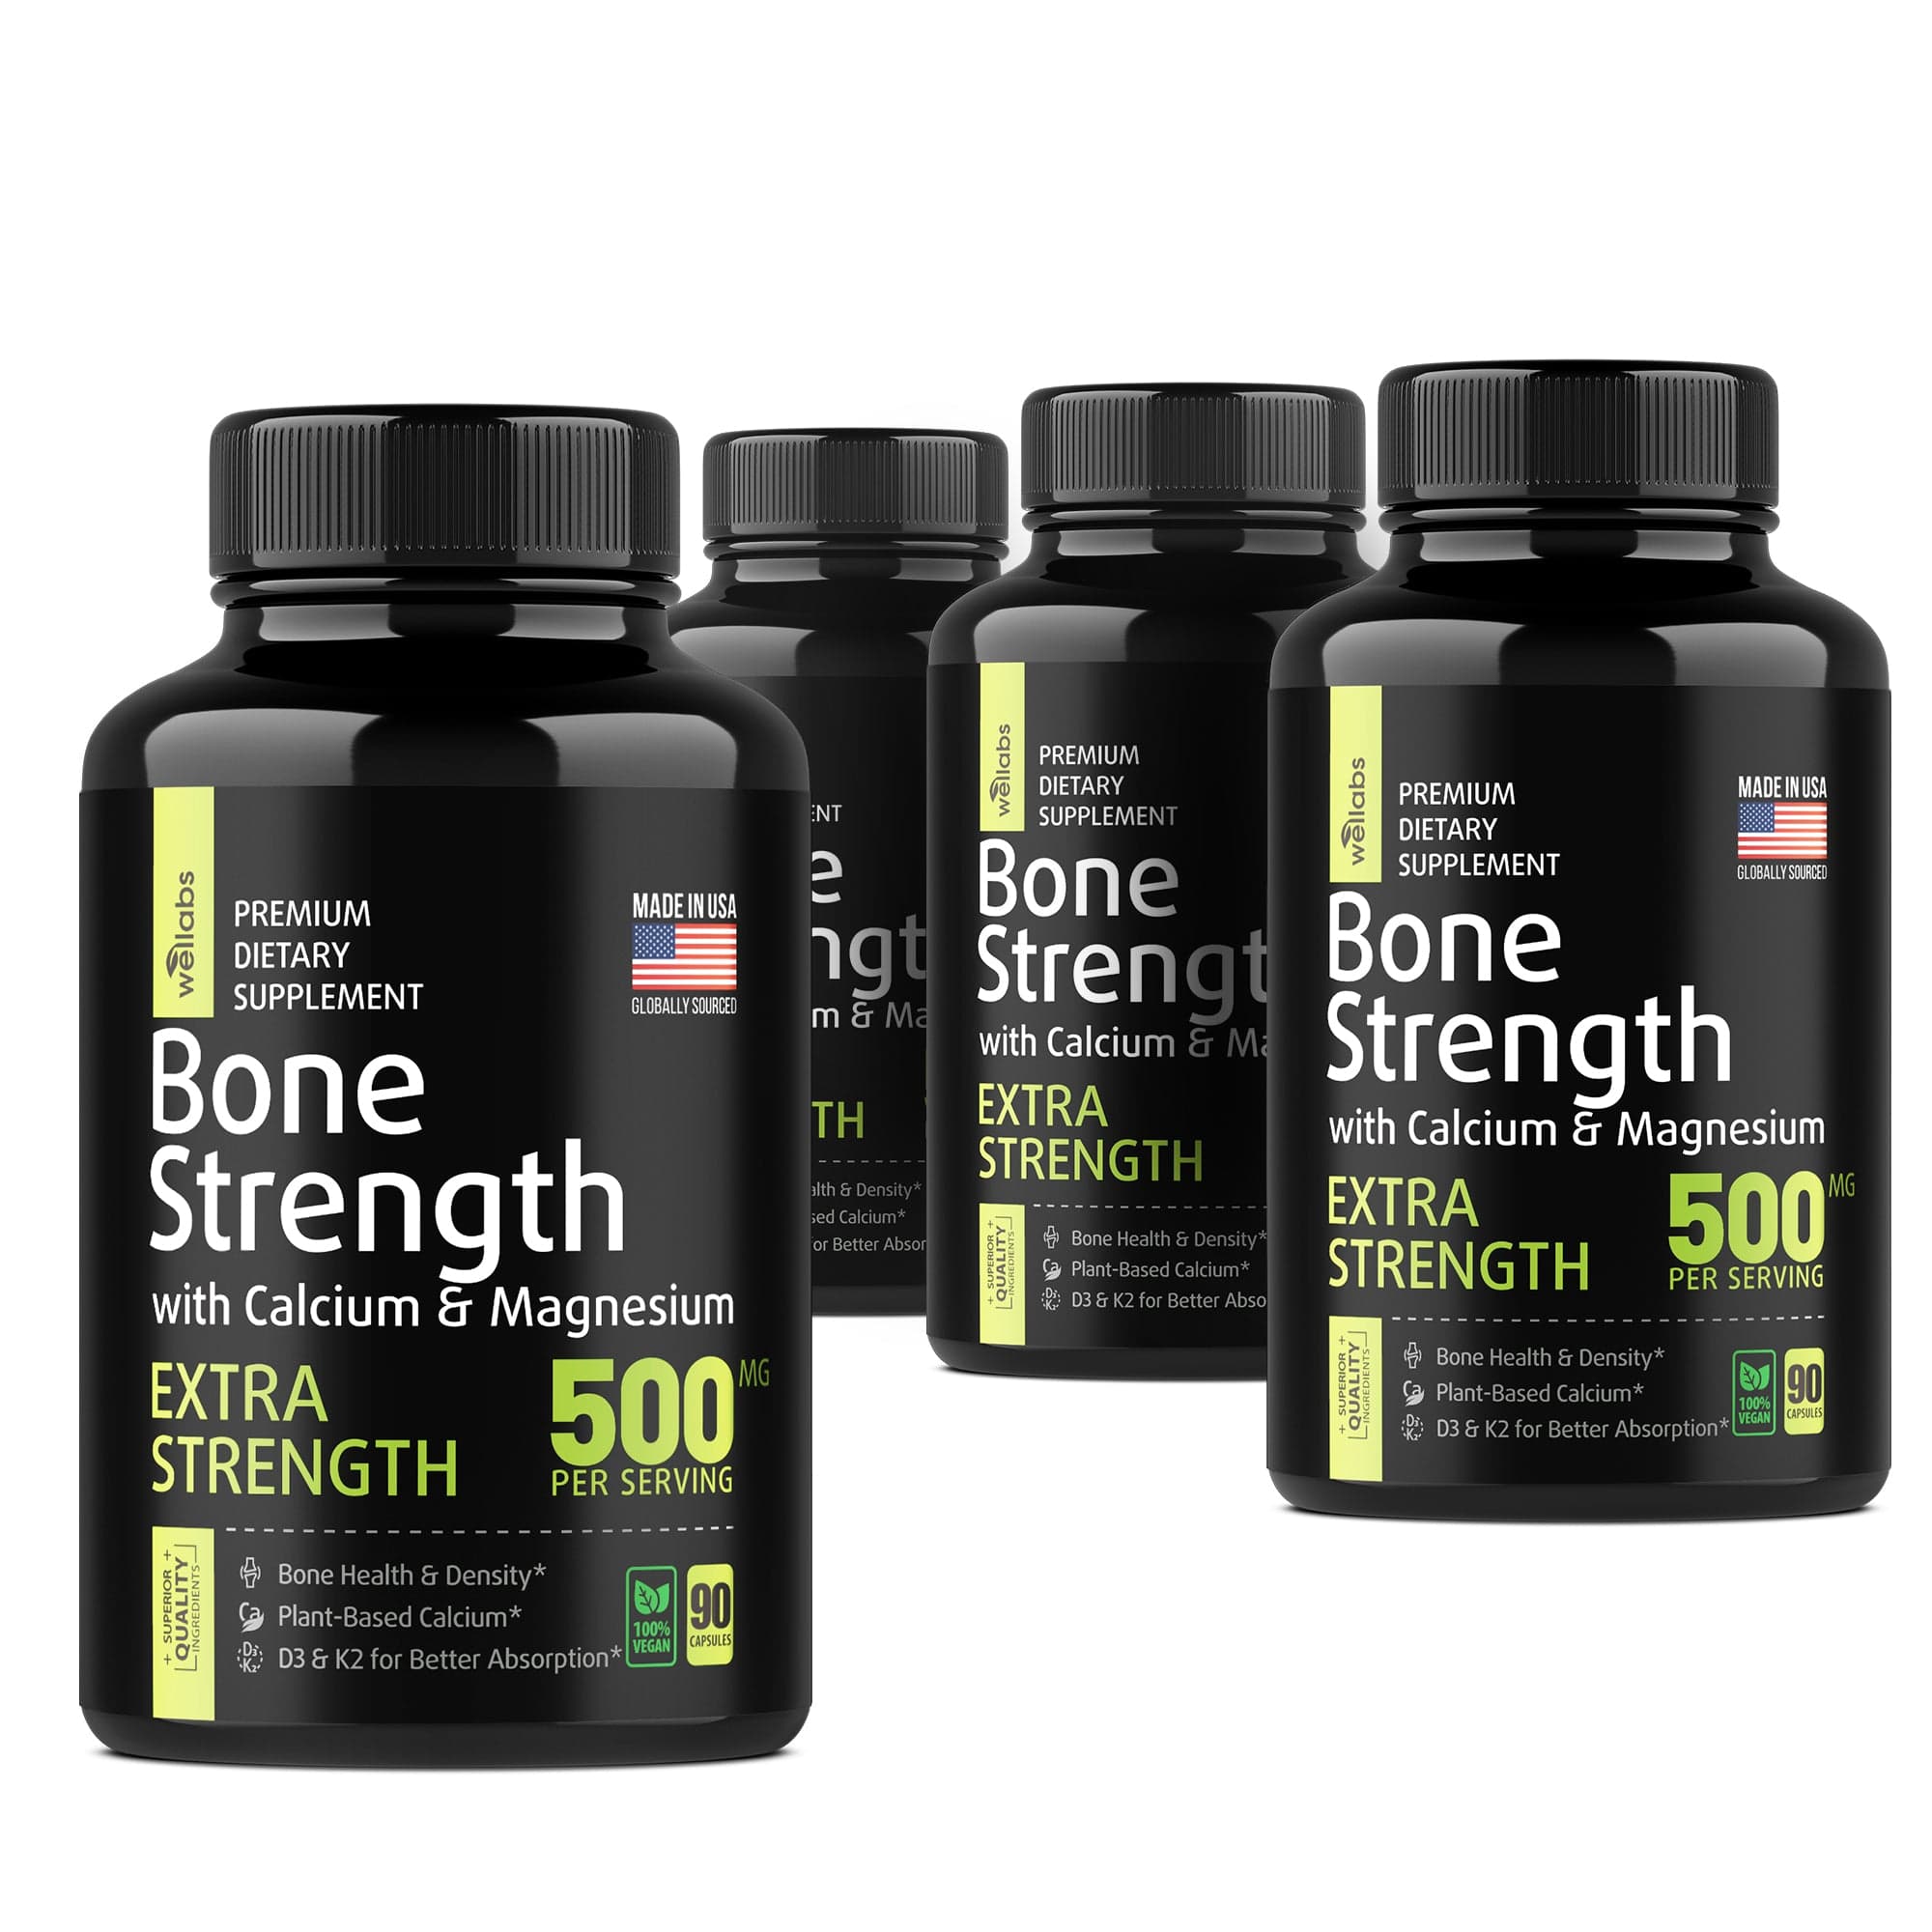 Vitamins For Bone Health And Strength - Buy 3 Get 1 Free